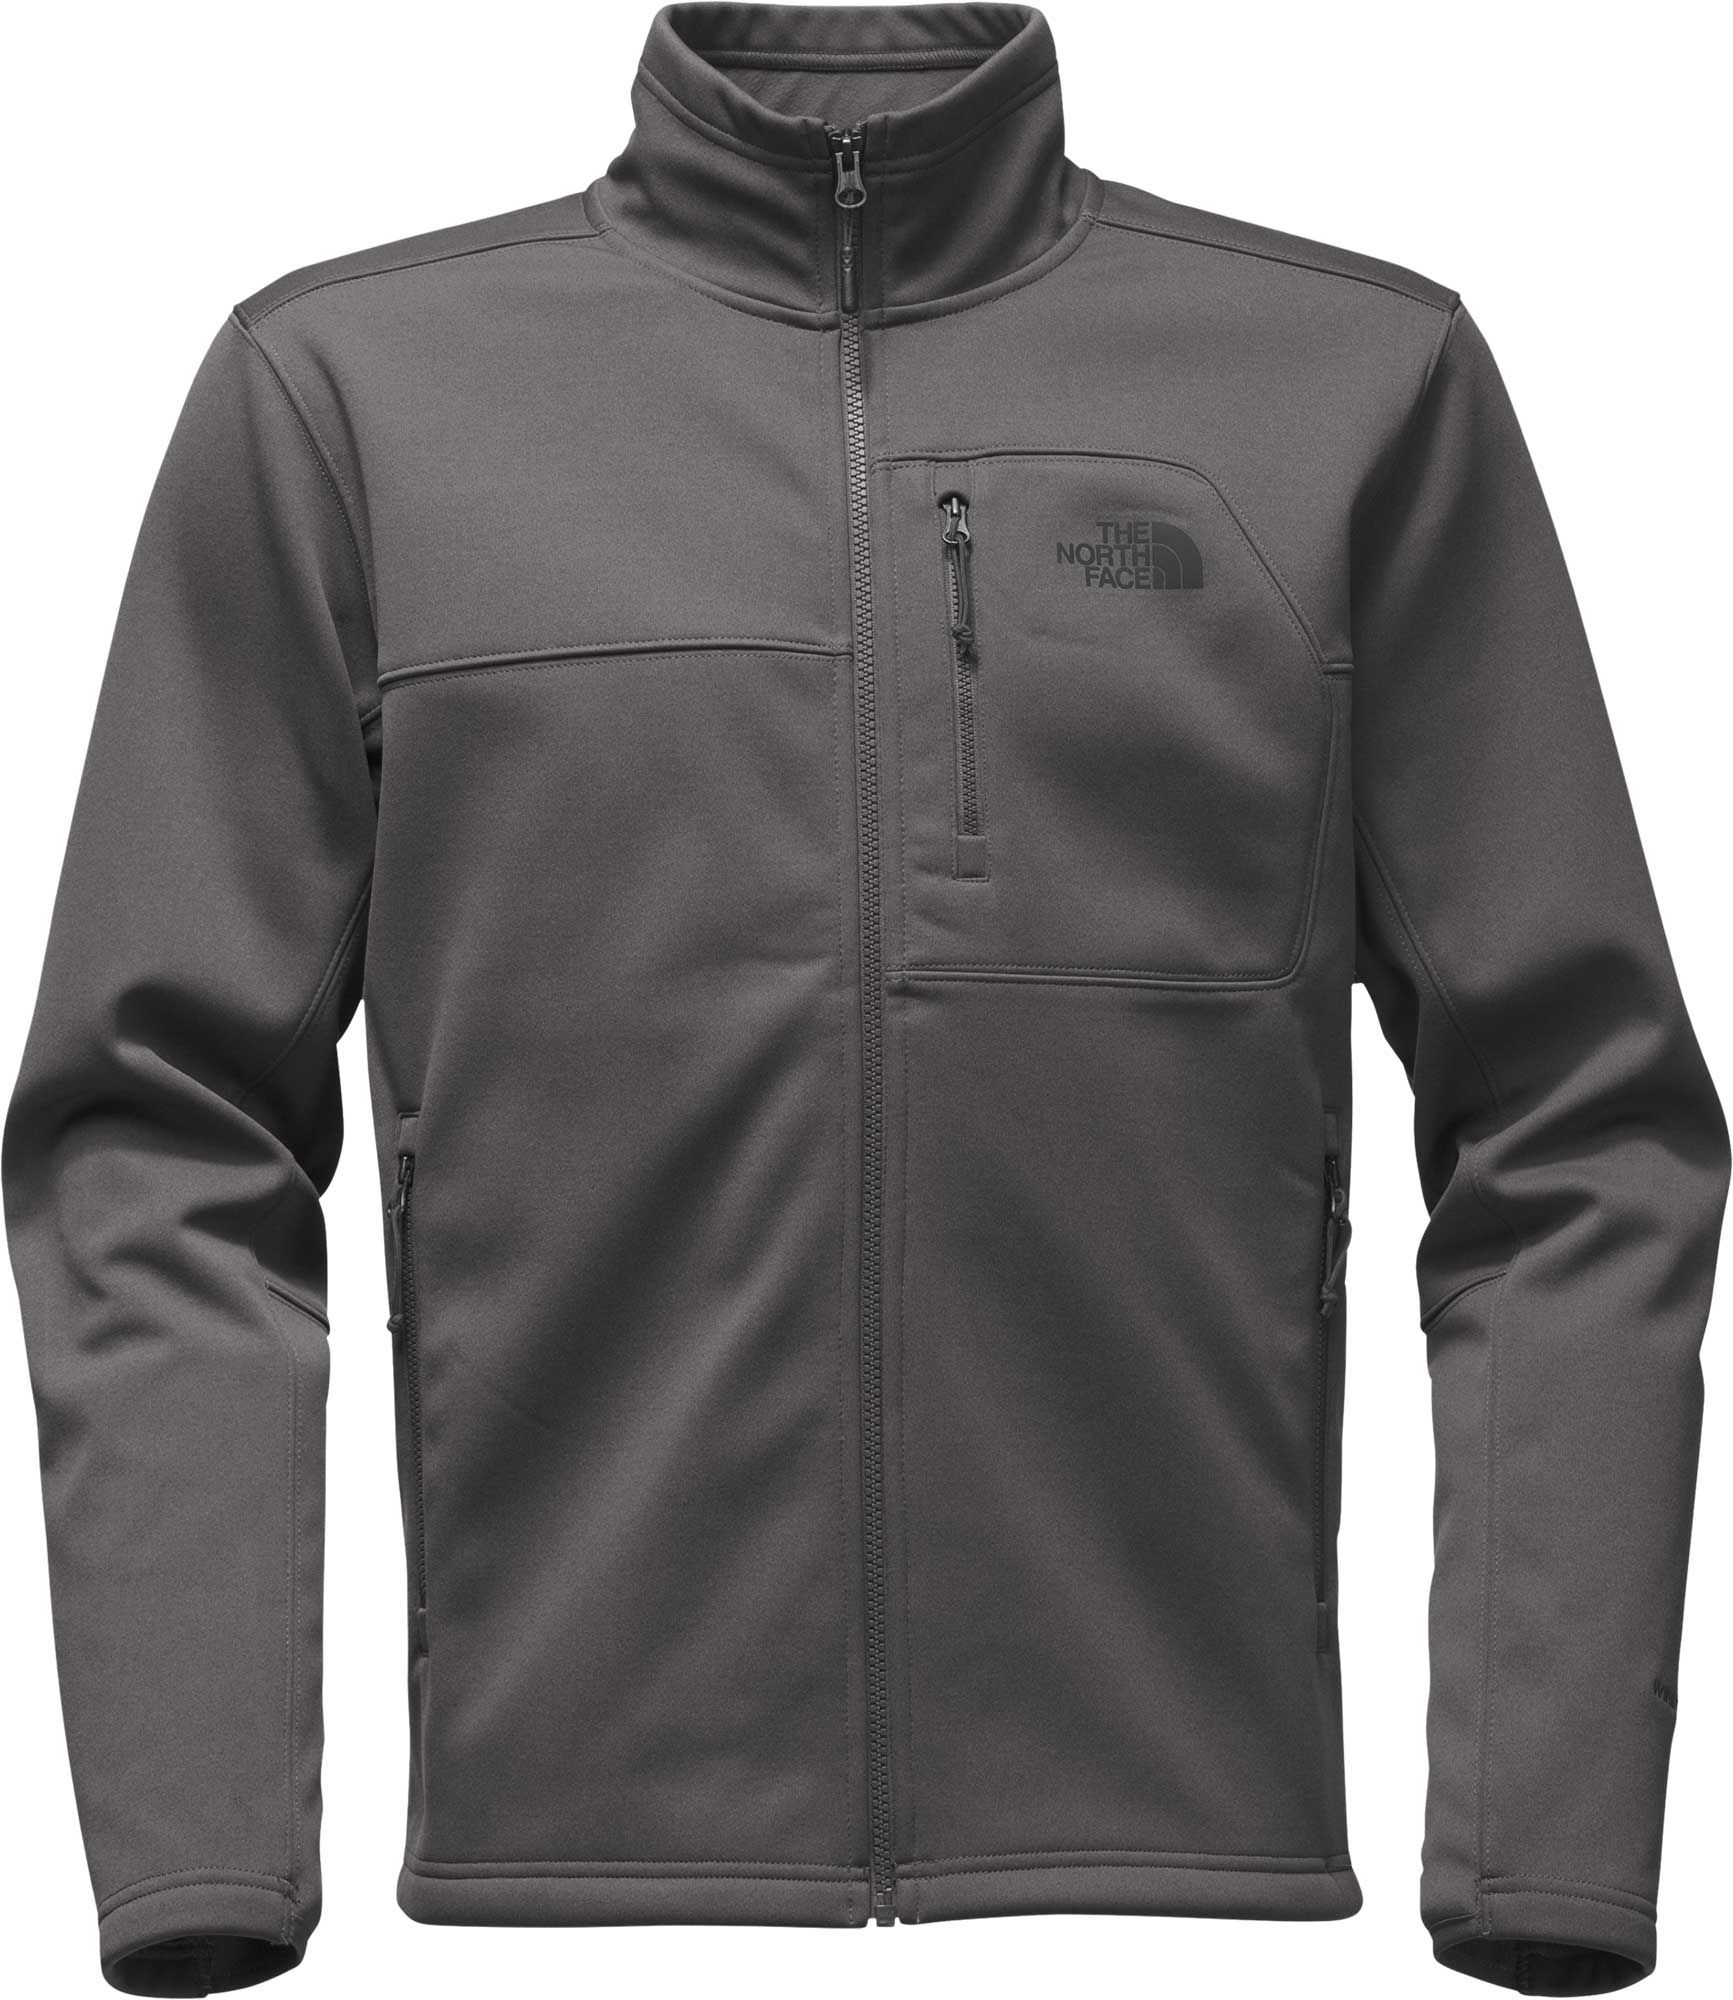 The North Face Men's Apex Risor Soft Shell Jacket (Regular and Big & Tall) - .97